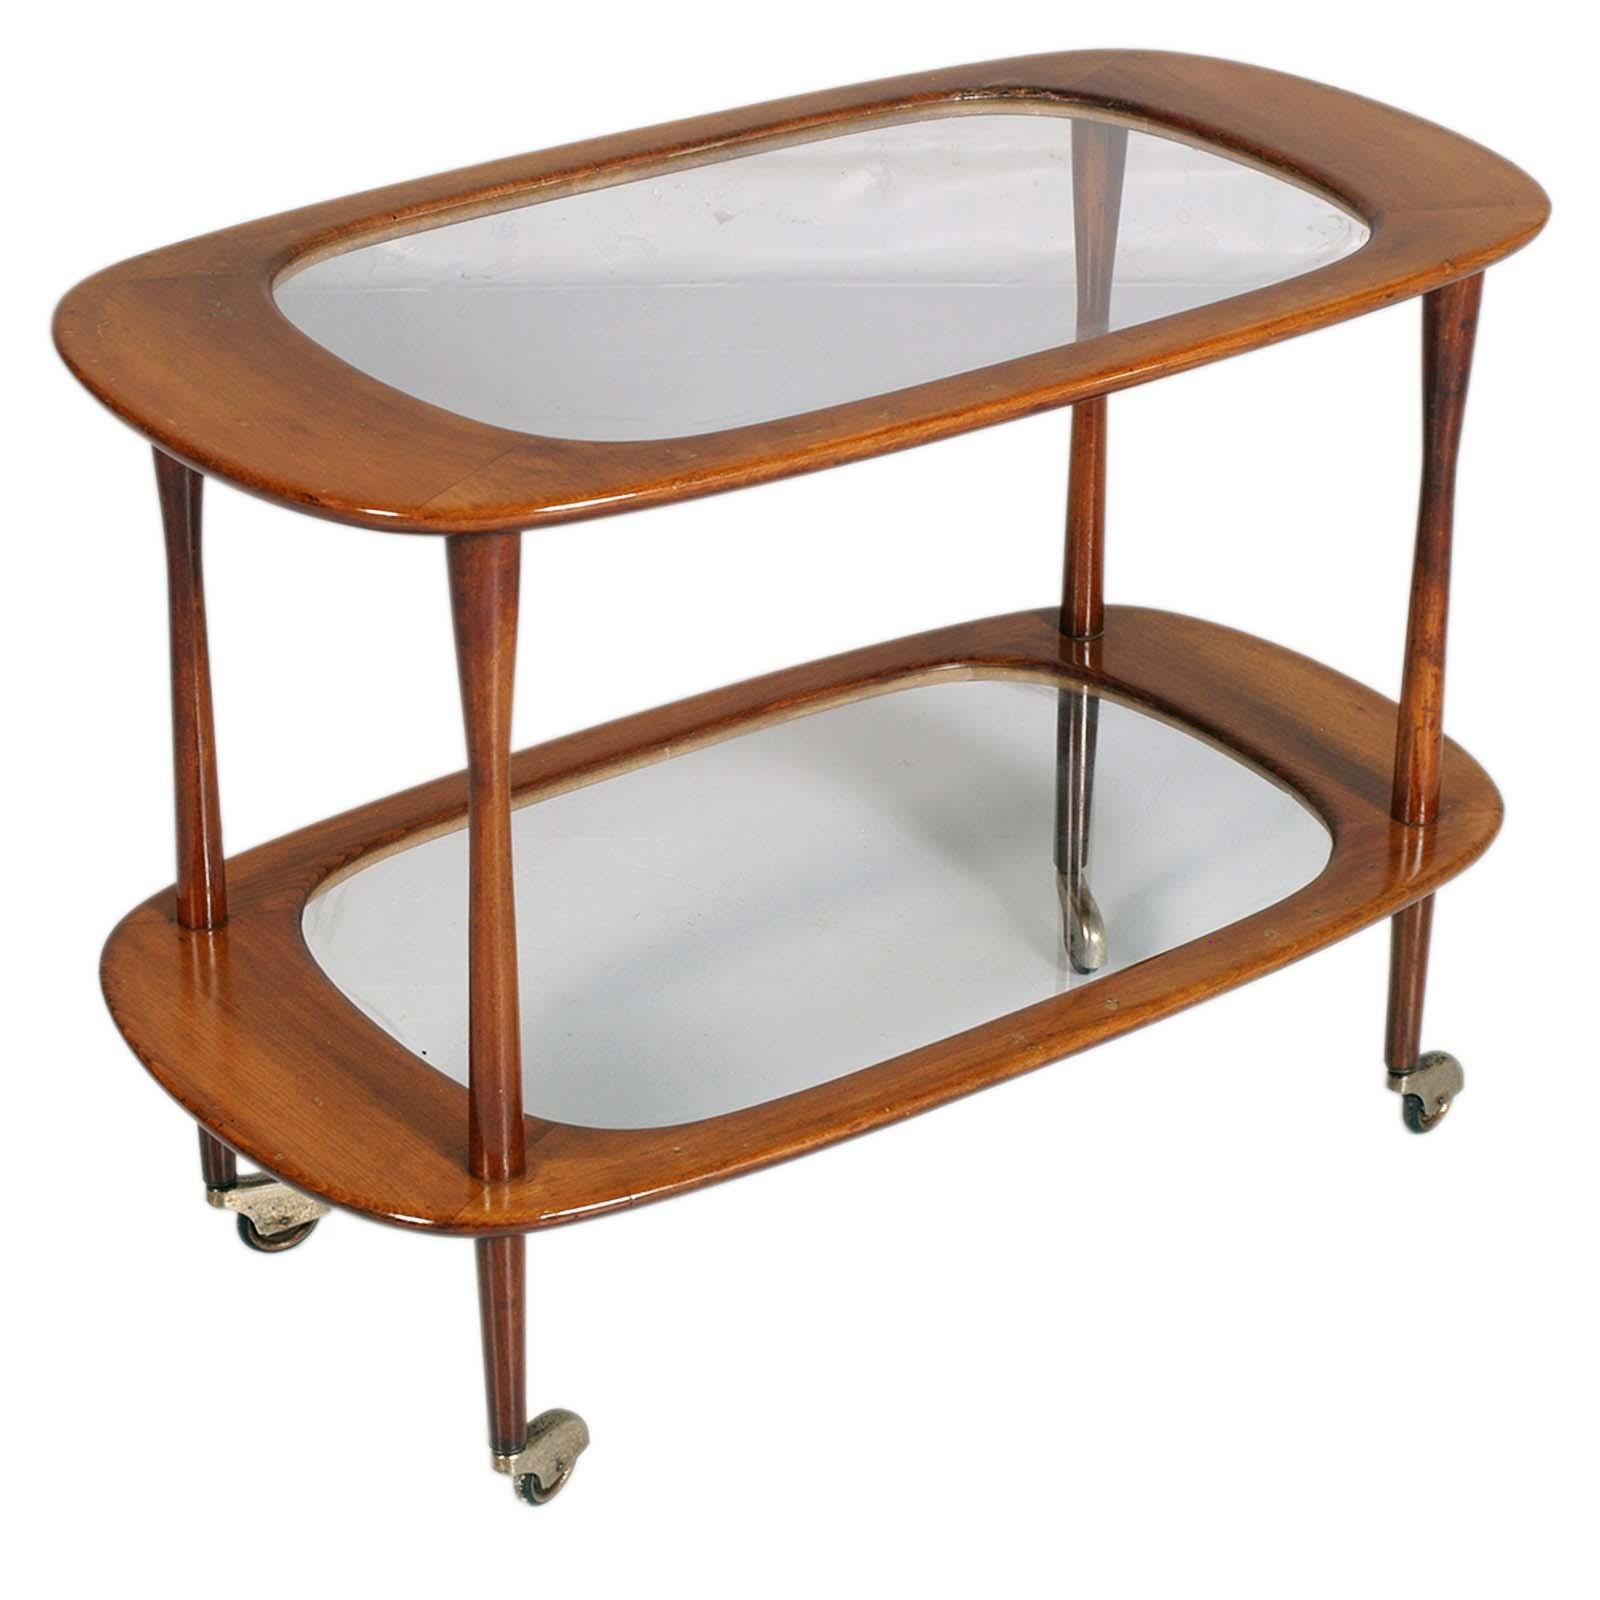 Iconic Mid Century Service Cart by Cesare Lacca for Cassina, in Teack , with original Crystal Tops
This fantastic piece was designed in Italy during the 1950s for Cassina.

This piece is going to add lightness to a living room with its shapes and